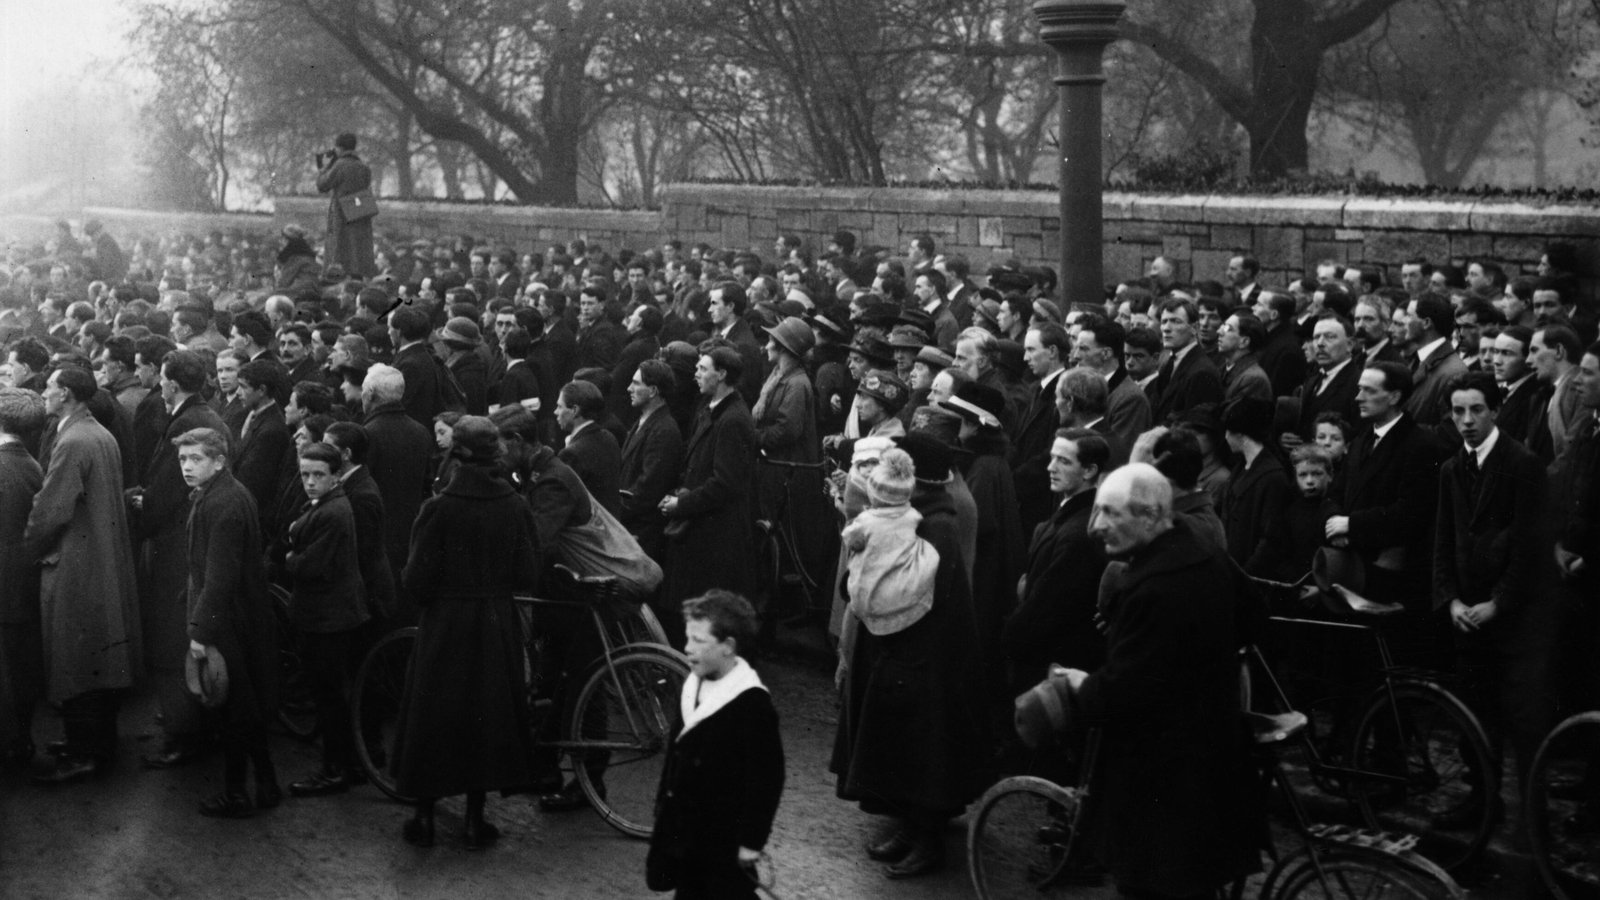 Image - Crowds outside Mountjoy Prison, Dublin, during the execution of Kevin Barry